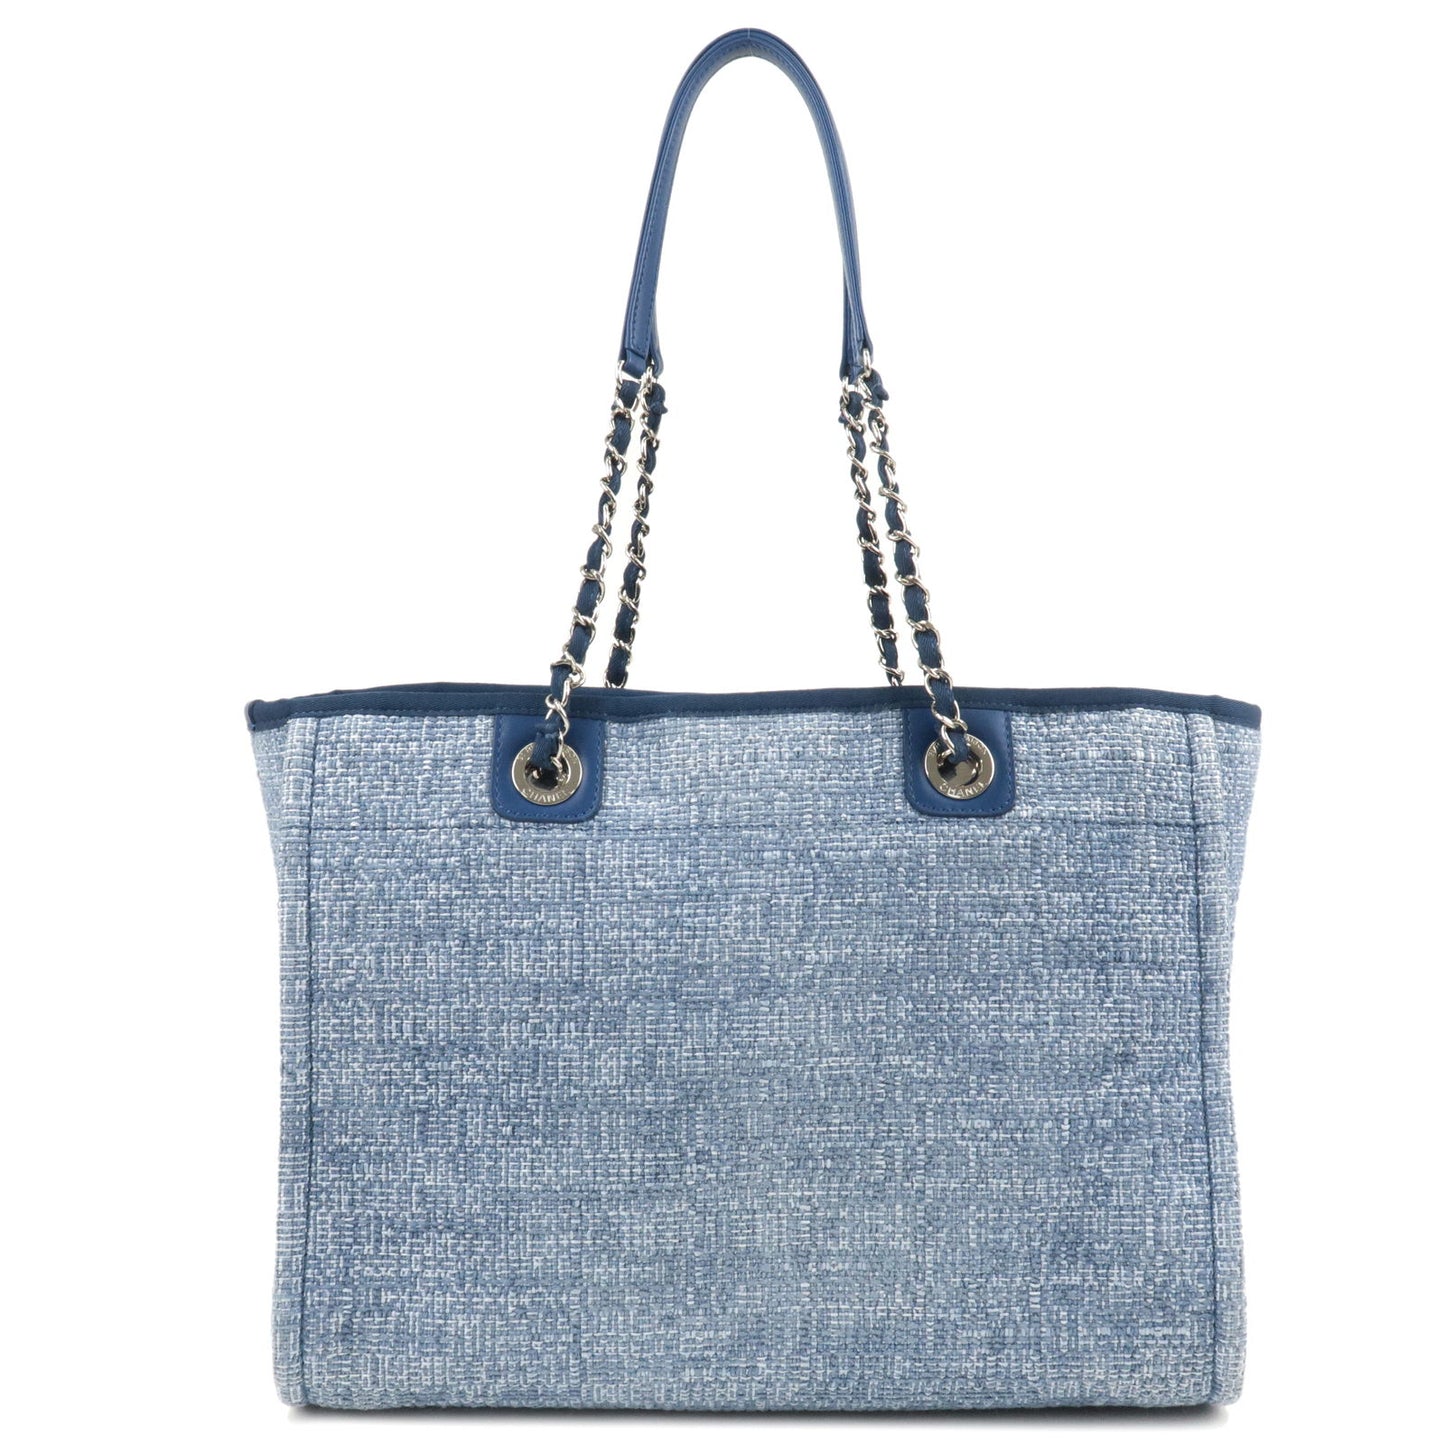 CHANEL Deauville MM Canvas Leather Chain Tote Bag Blue A67001